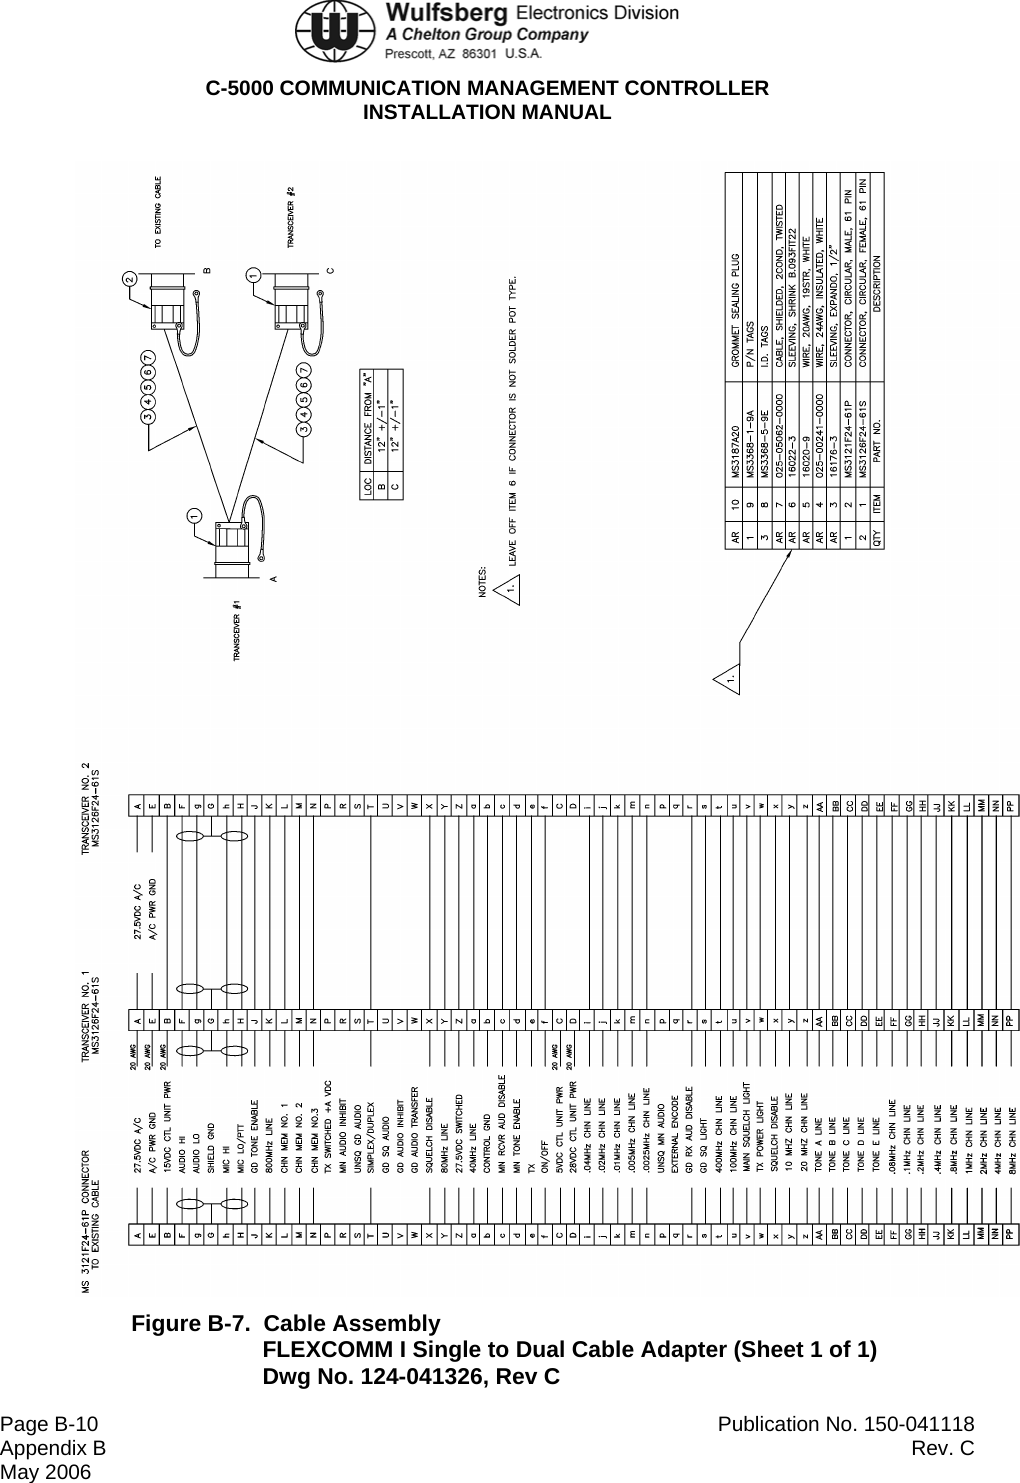  C-5000 COMMUNICATION MANAGEMENT CONTROLLER INSTALLATION MANUAL  Page B-10   Publication No. 150-041118 Appendix B  Rev. C  May 2006  Figure B-7.  Cable Assembly FLEXCOMM I Single to Dual Cable Adapter (Sheet 1 of 1) Dwg No. 124-041326, Rev C 